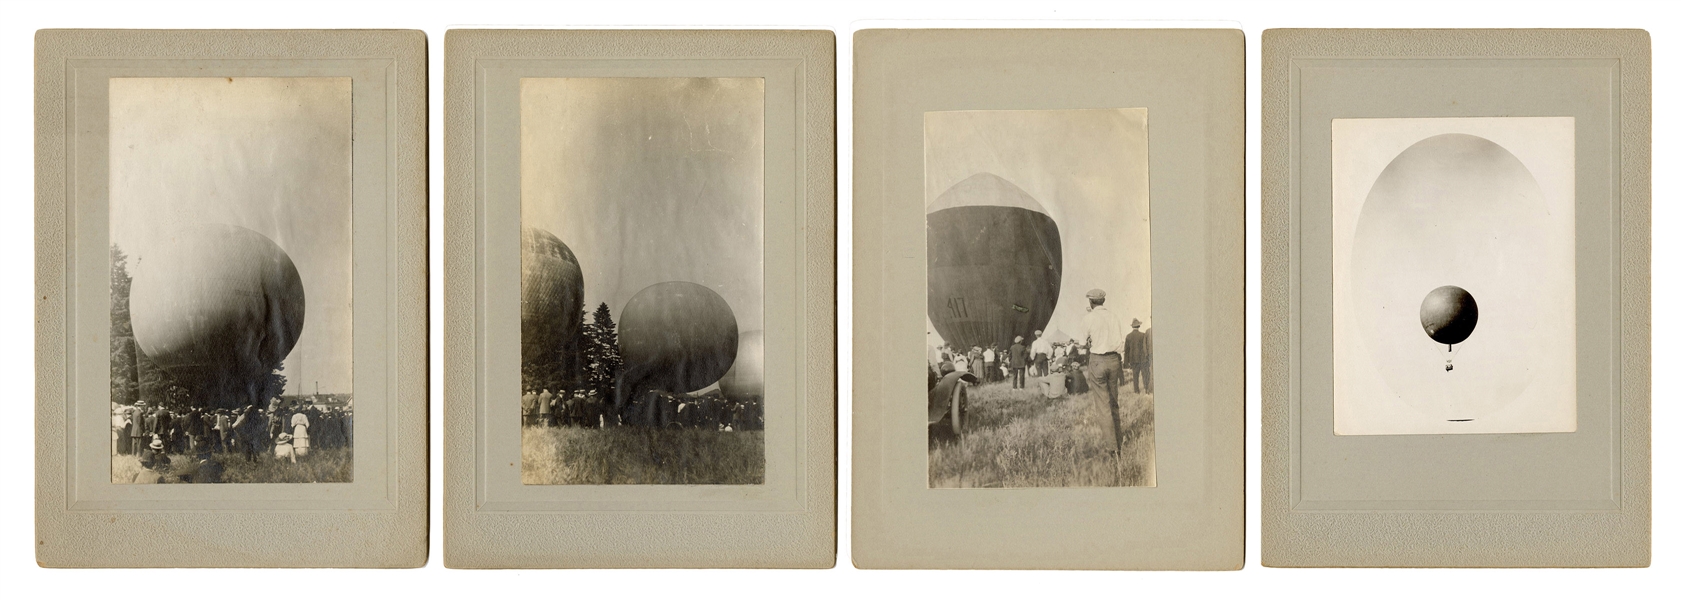 Group of Four Ballooning Snapshots.